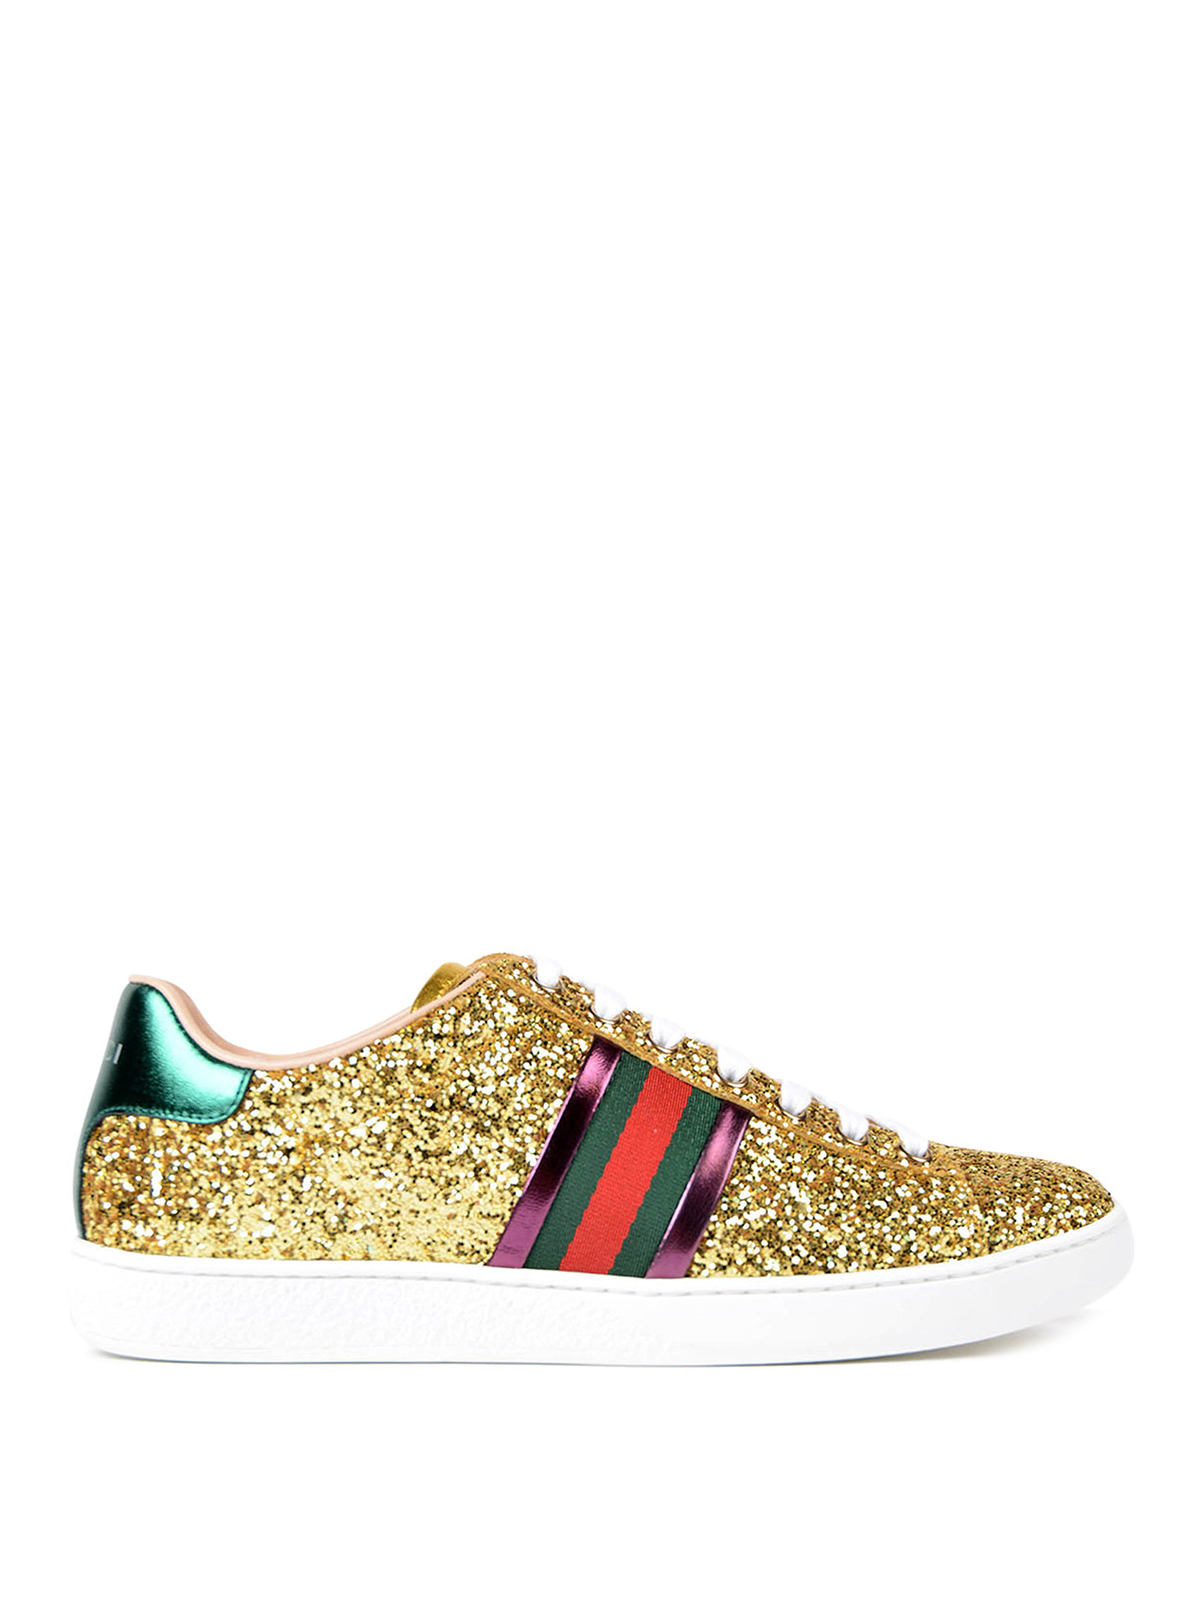 Gucci - Ace Glitter low top sneakers 